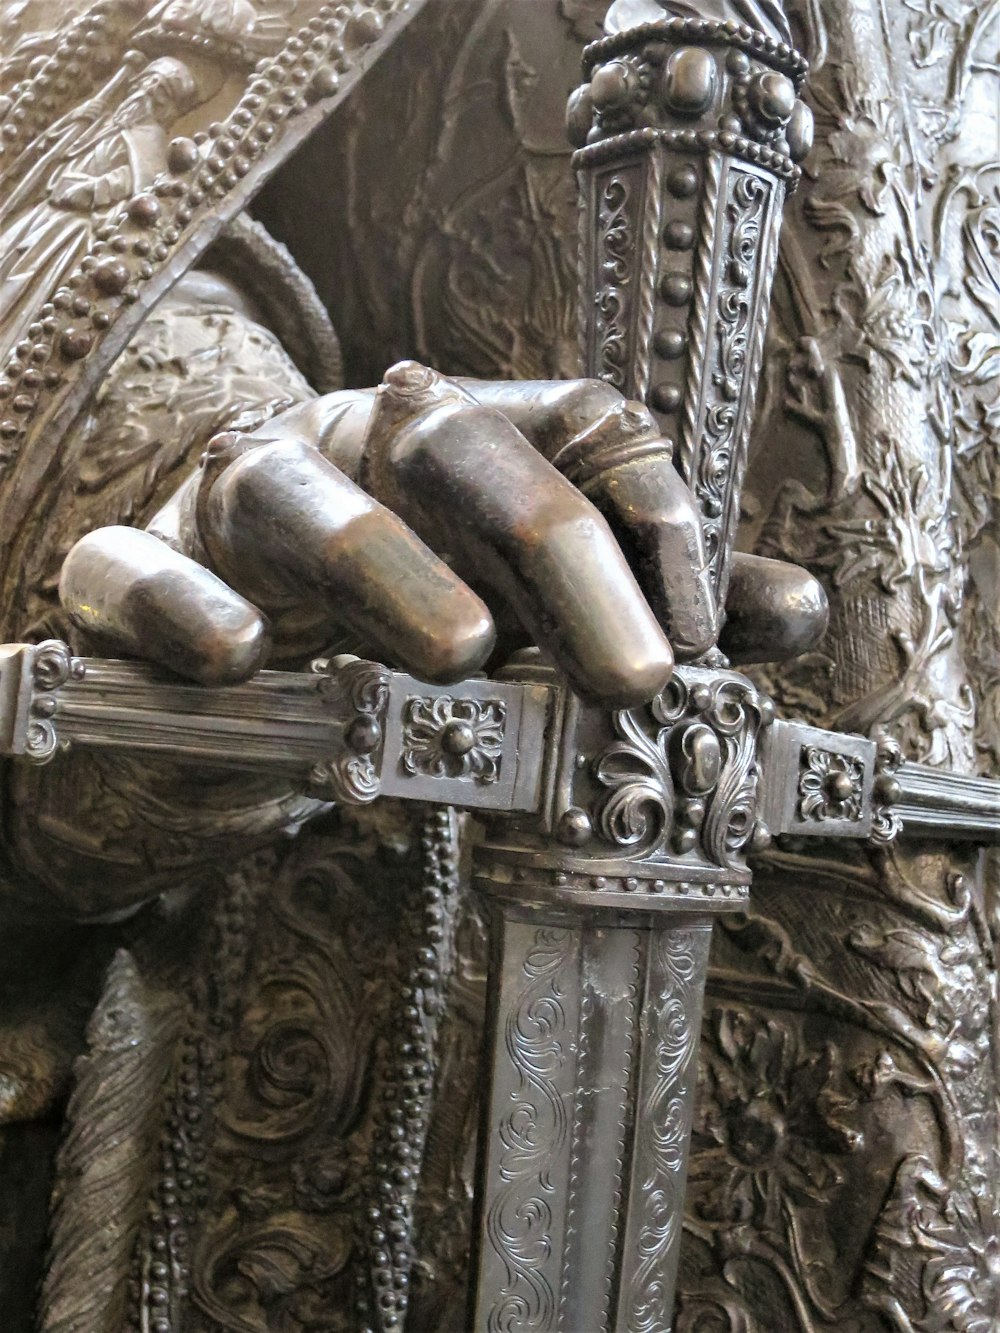 a close up of a statue of a person holding a sword